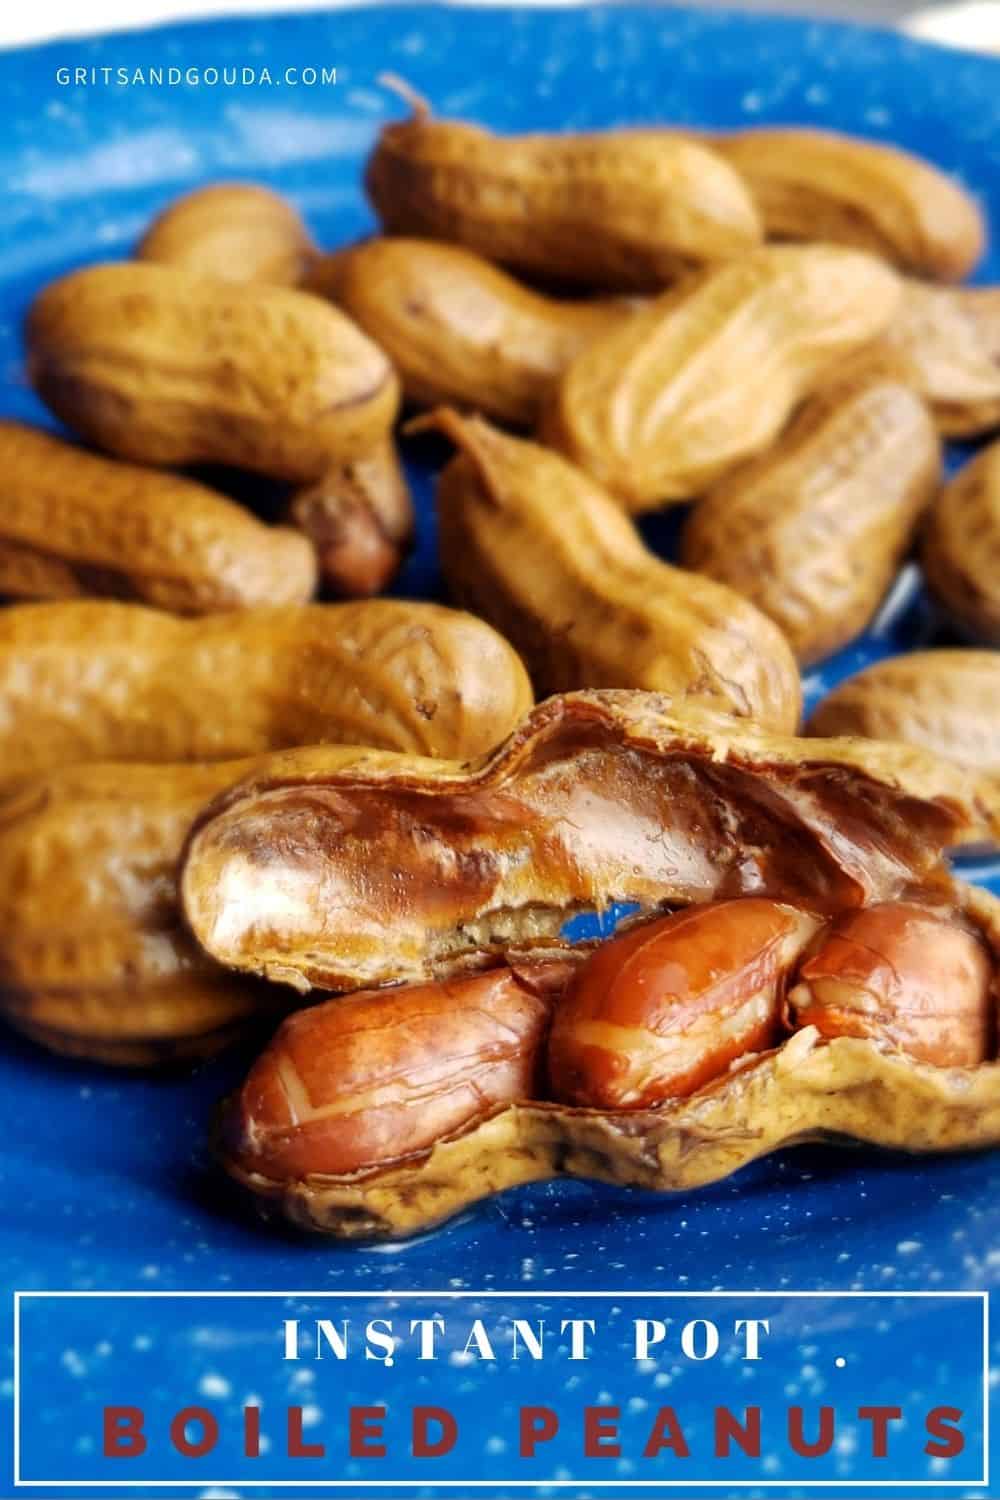 Boiled peanuts on a blue plate with one shell open with text overlay.